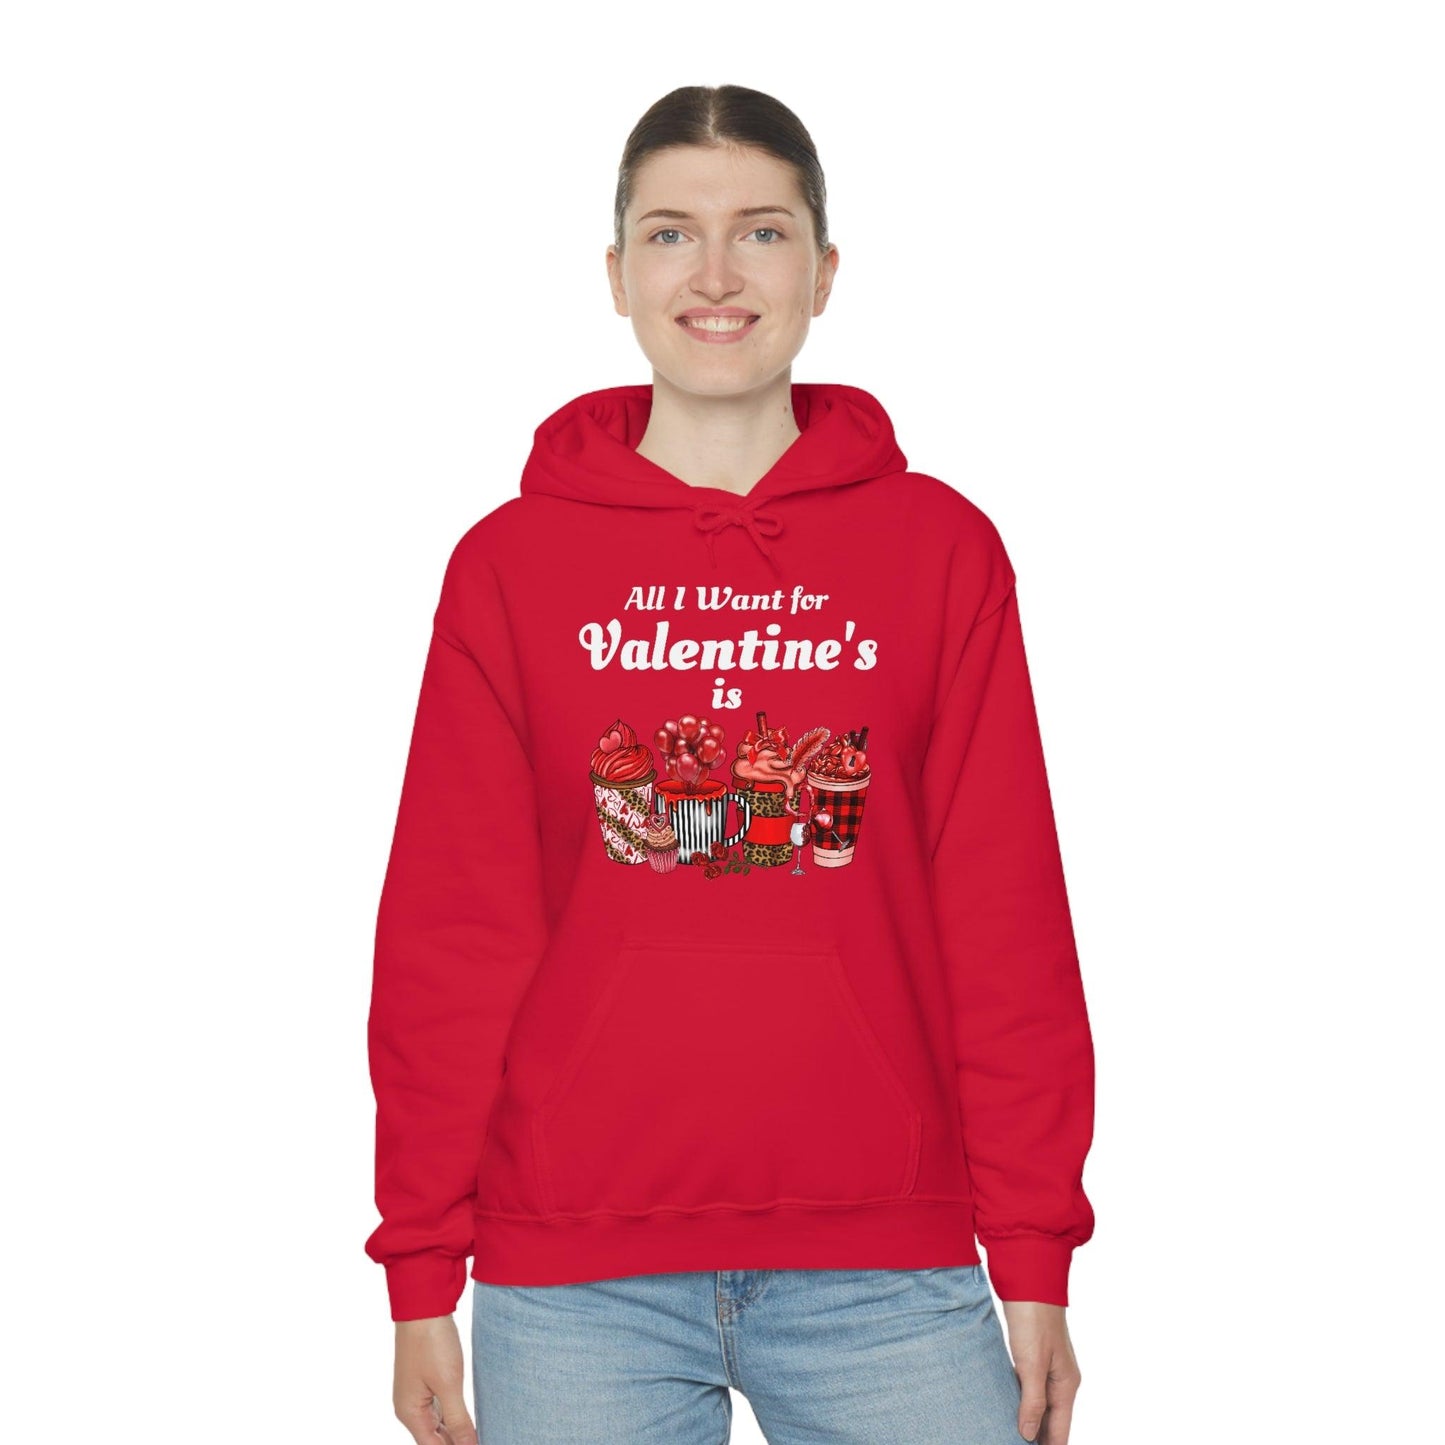 All I want for Valentine's is Coffee Hooded Sweatshirt